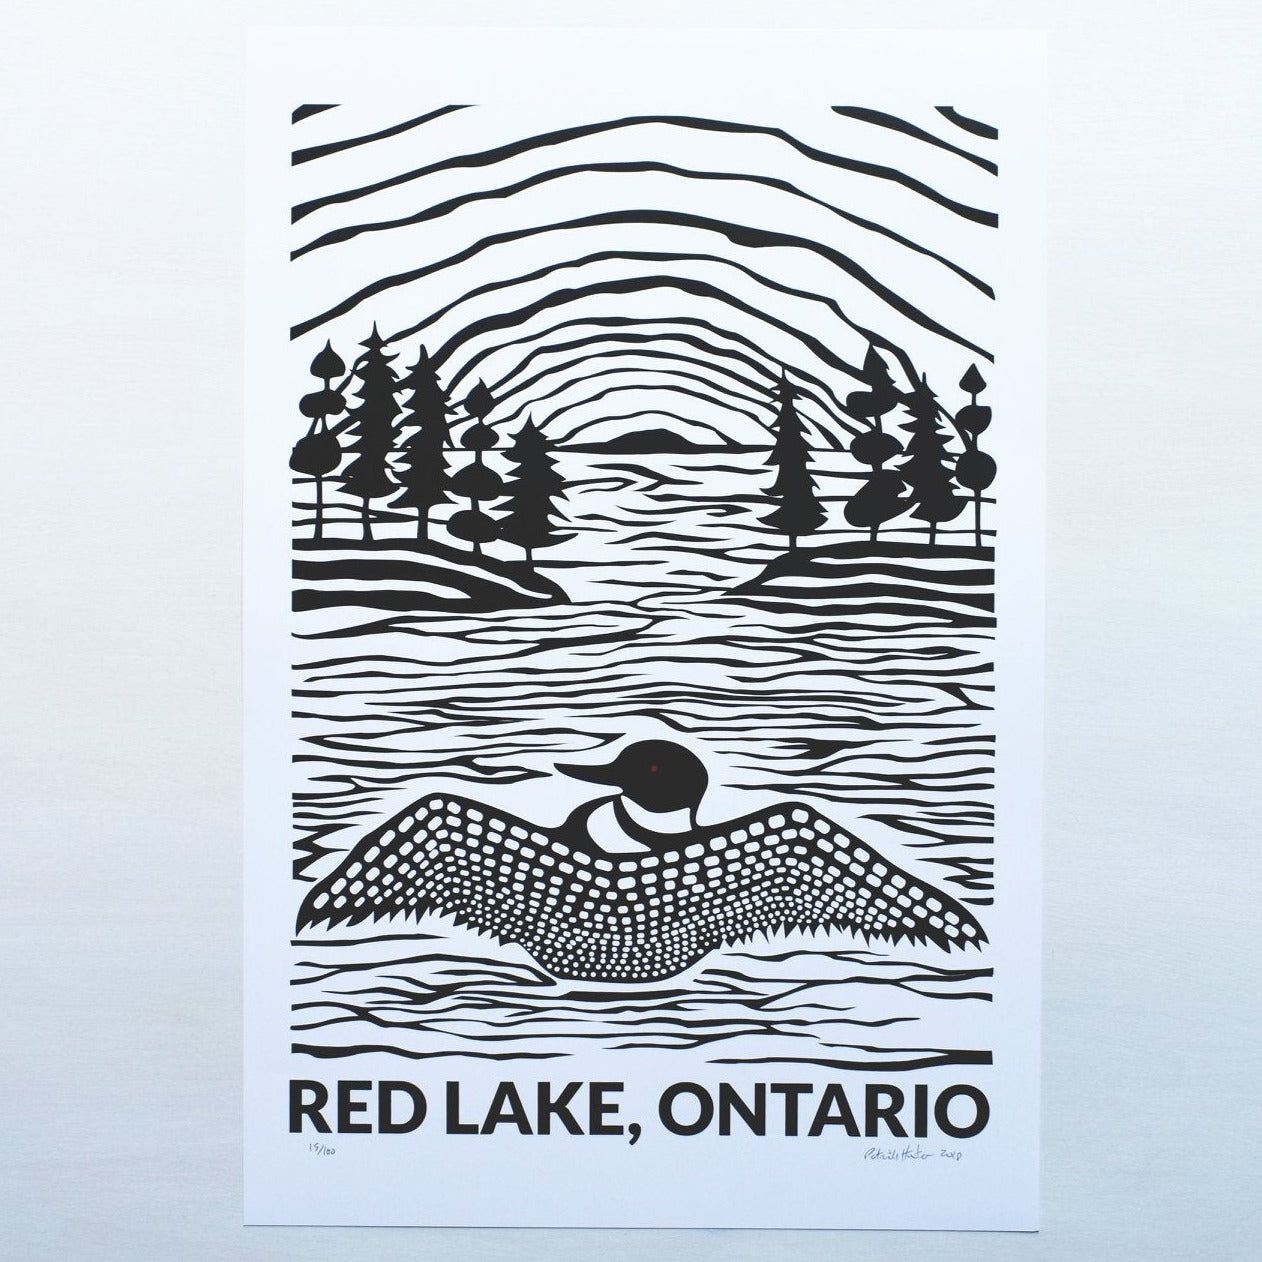 Print of Patrick Hunter's painting of a loon on a lake, black on white, woodland art style, above text reading Red Lake, Ontario.